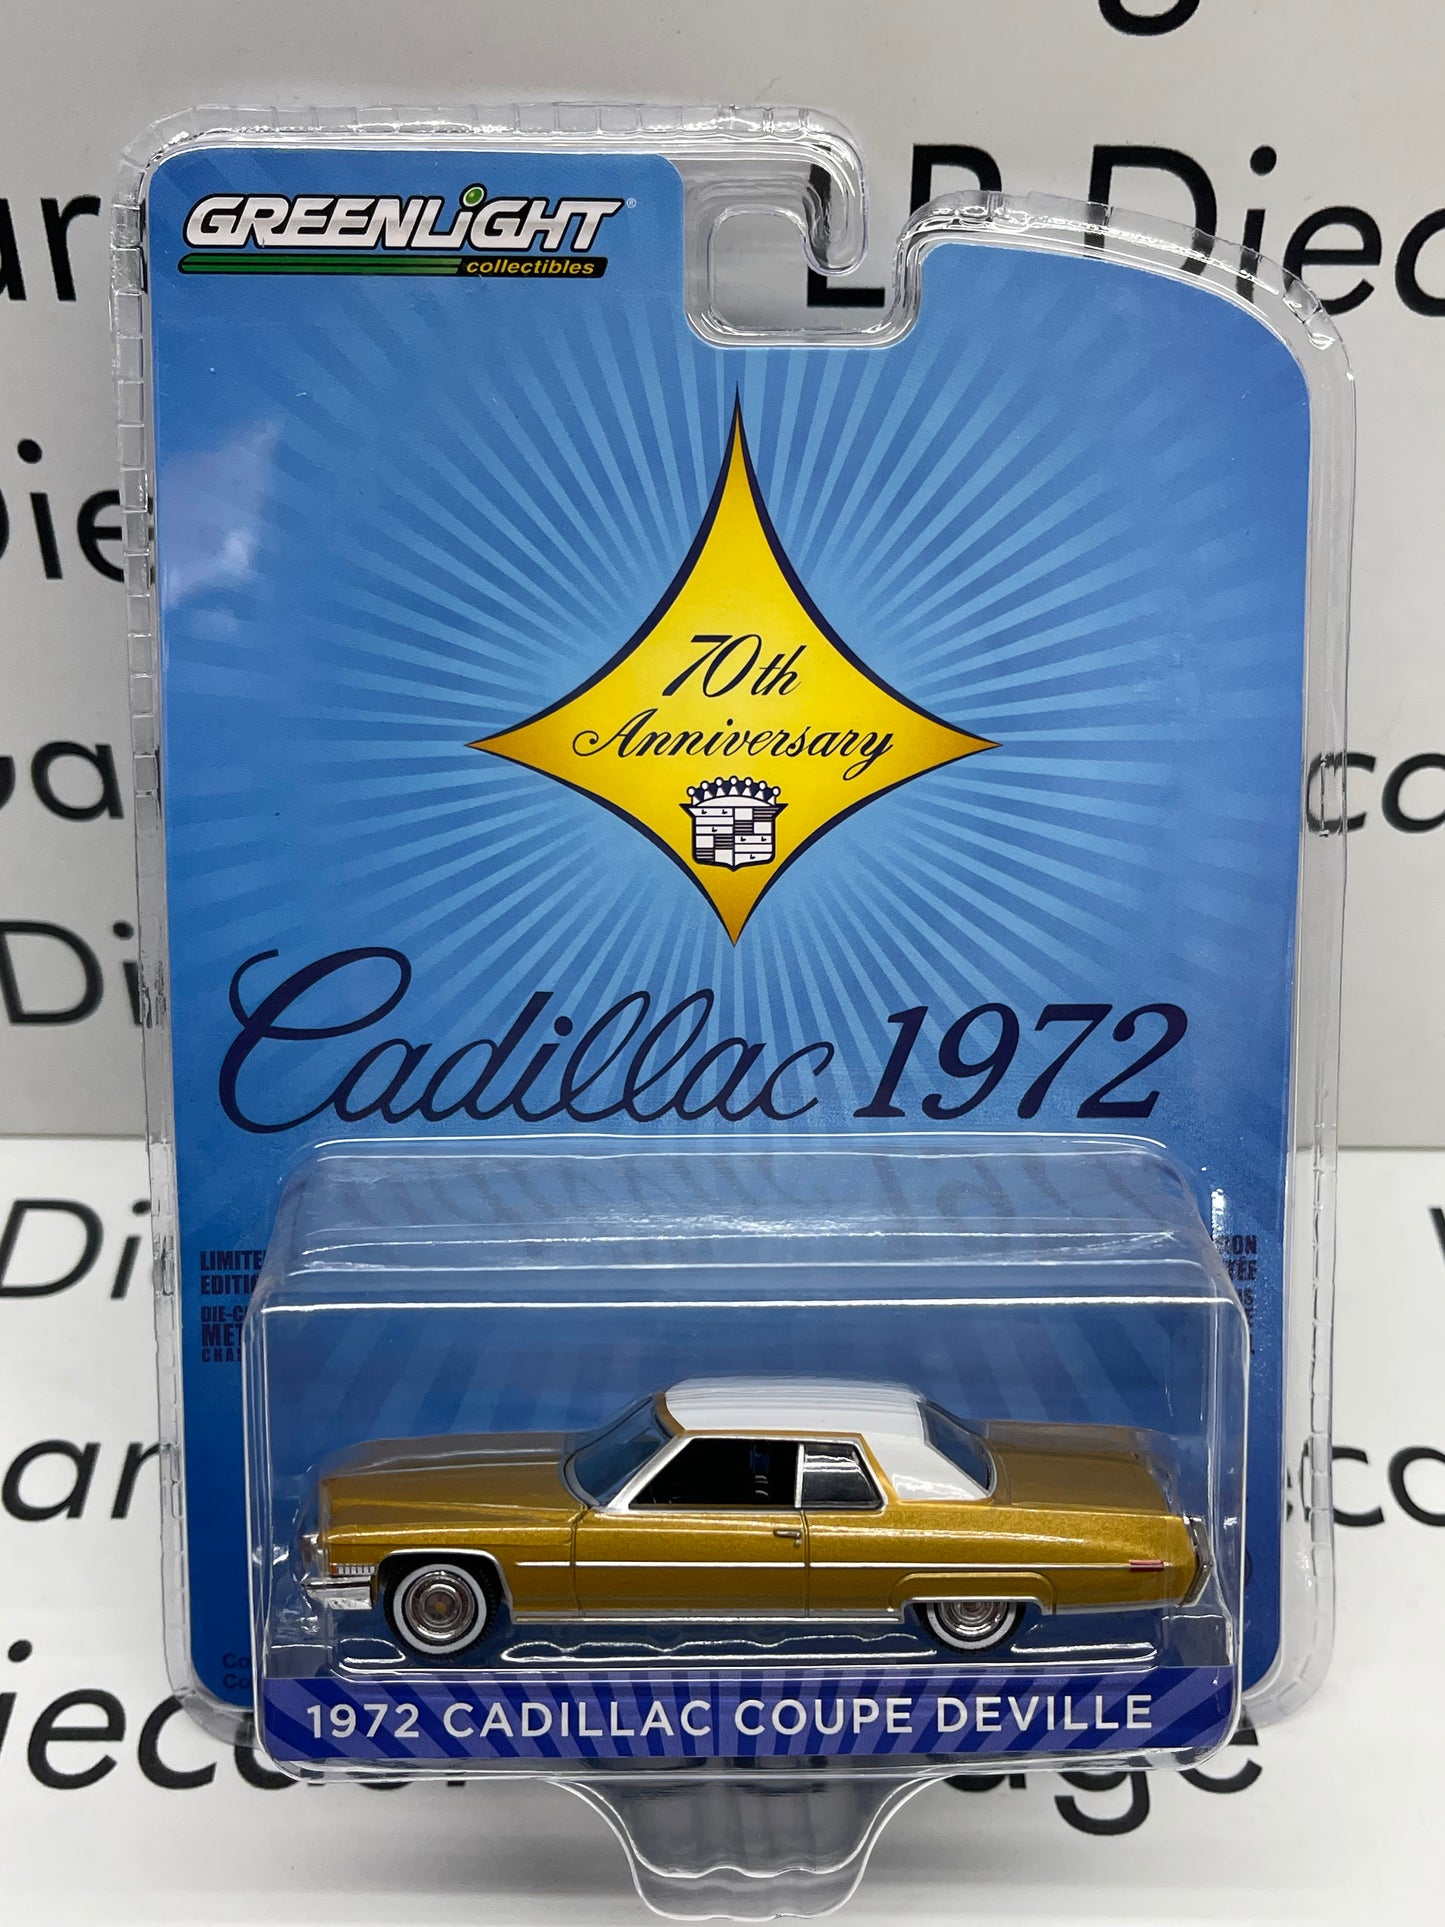 GREENLIGHT 1972 Cadillac Coupe Deville "70th Anniversary"  1:64 Diecast